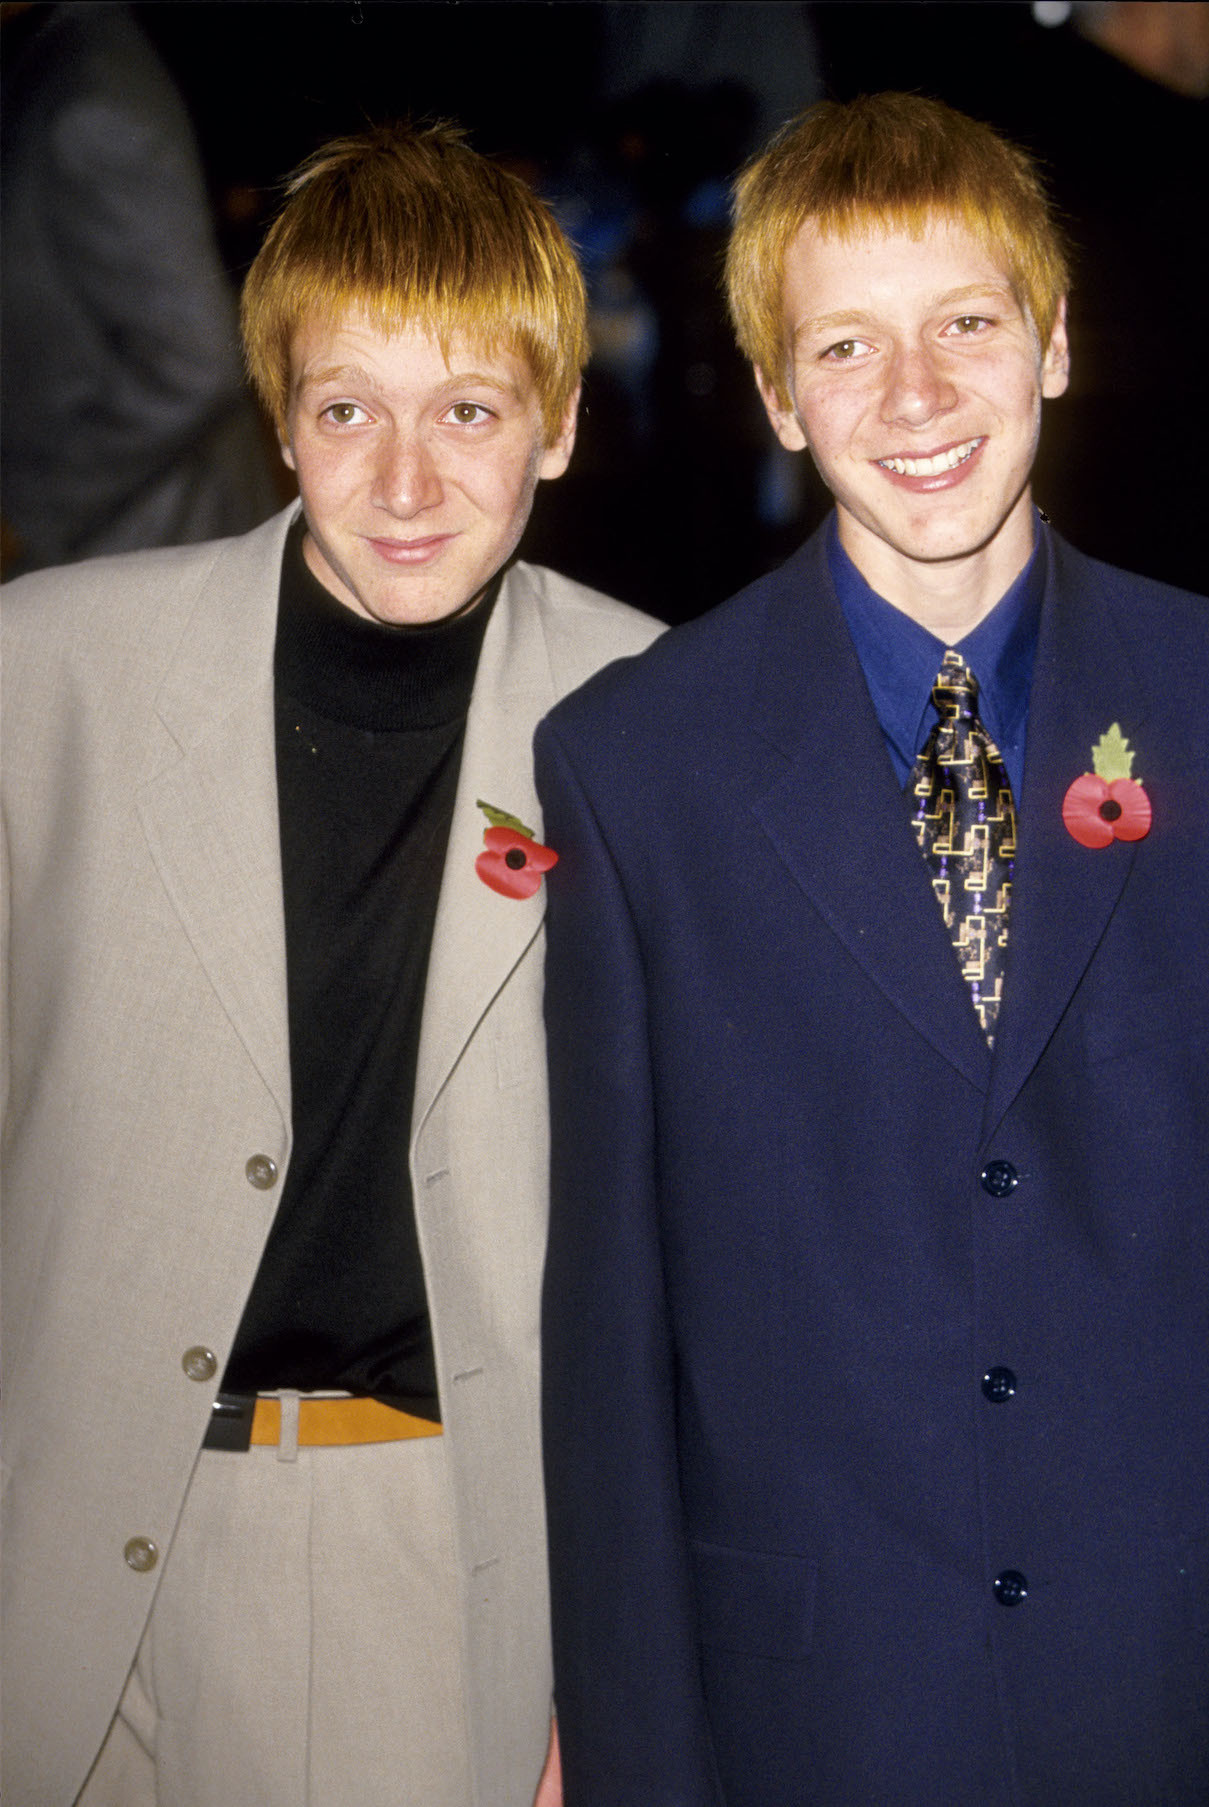 Oliver and Jamie Phelps at the premiere of 'Harry Potter and the Sorcerer's Stone'